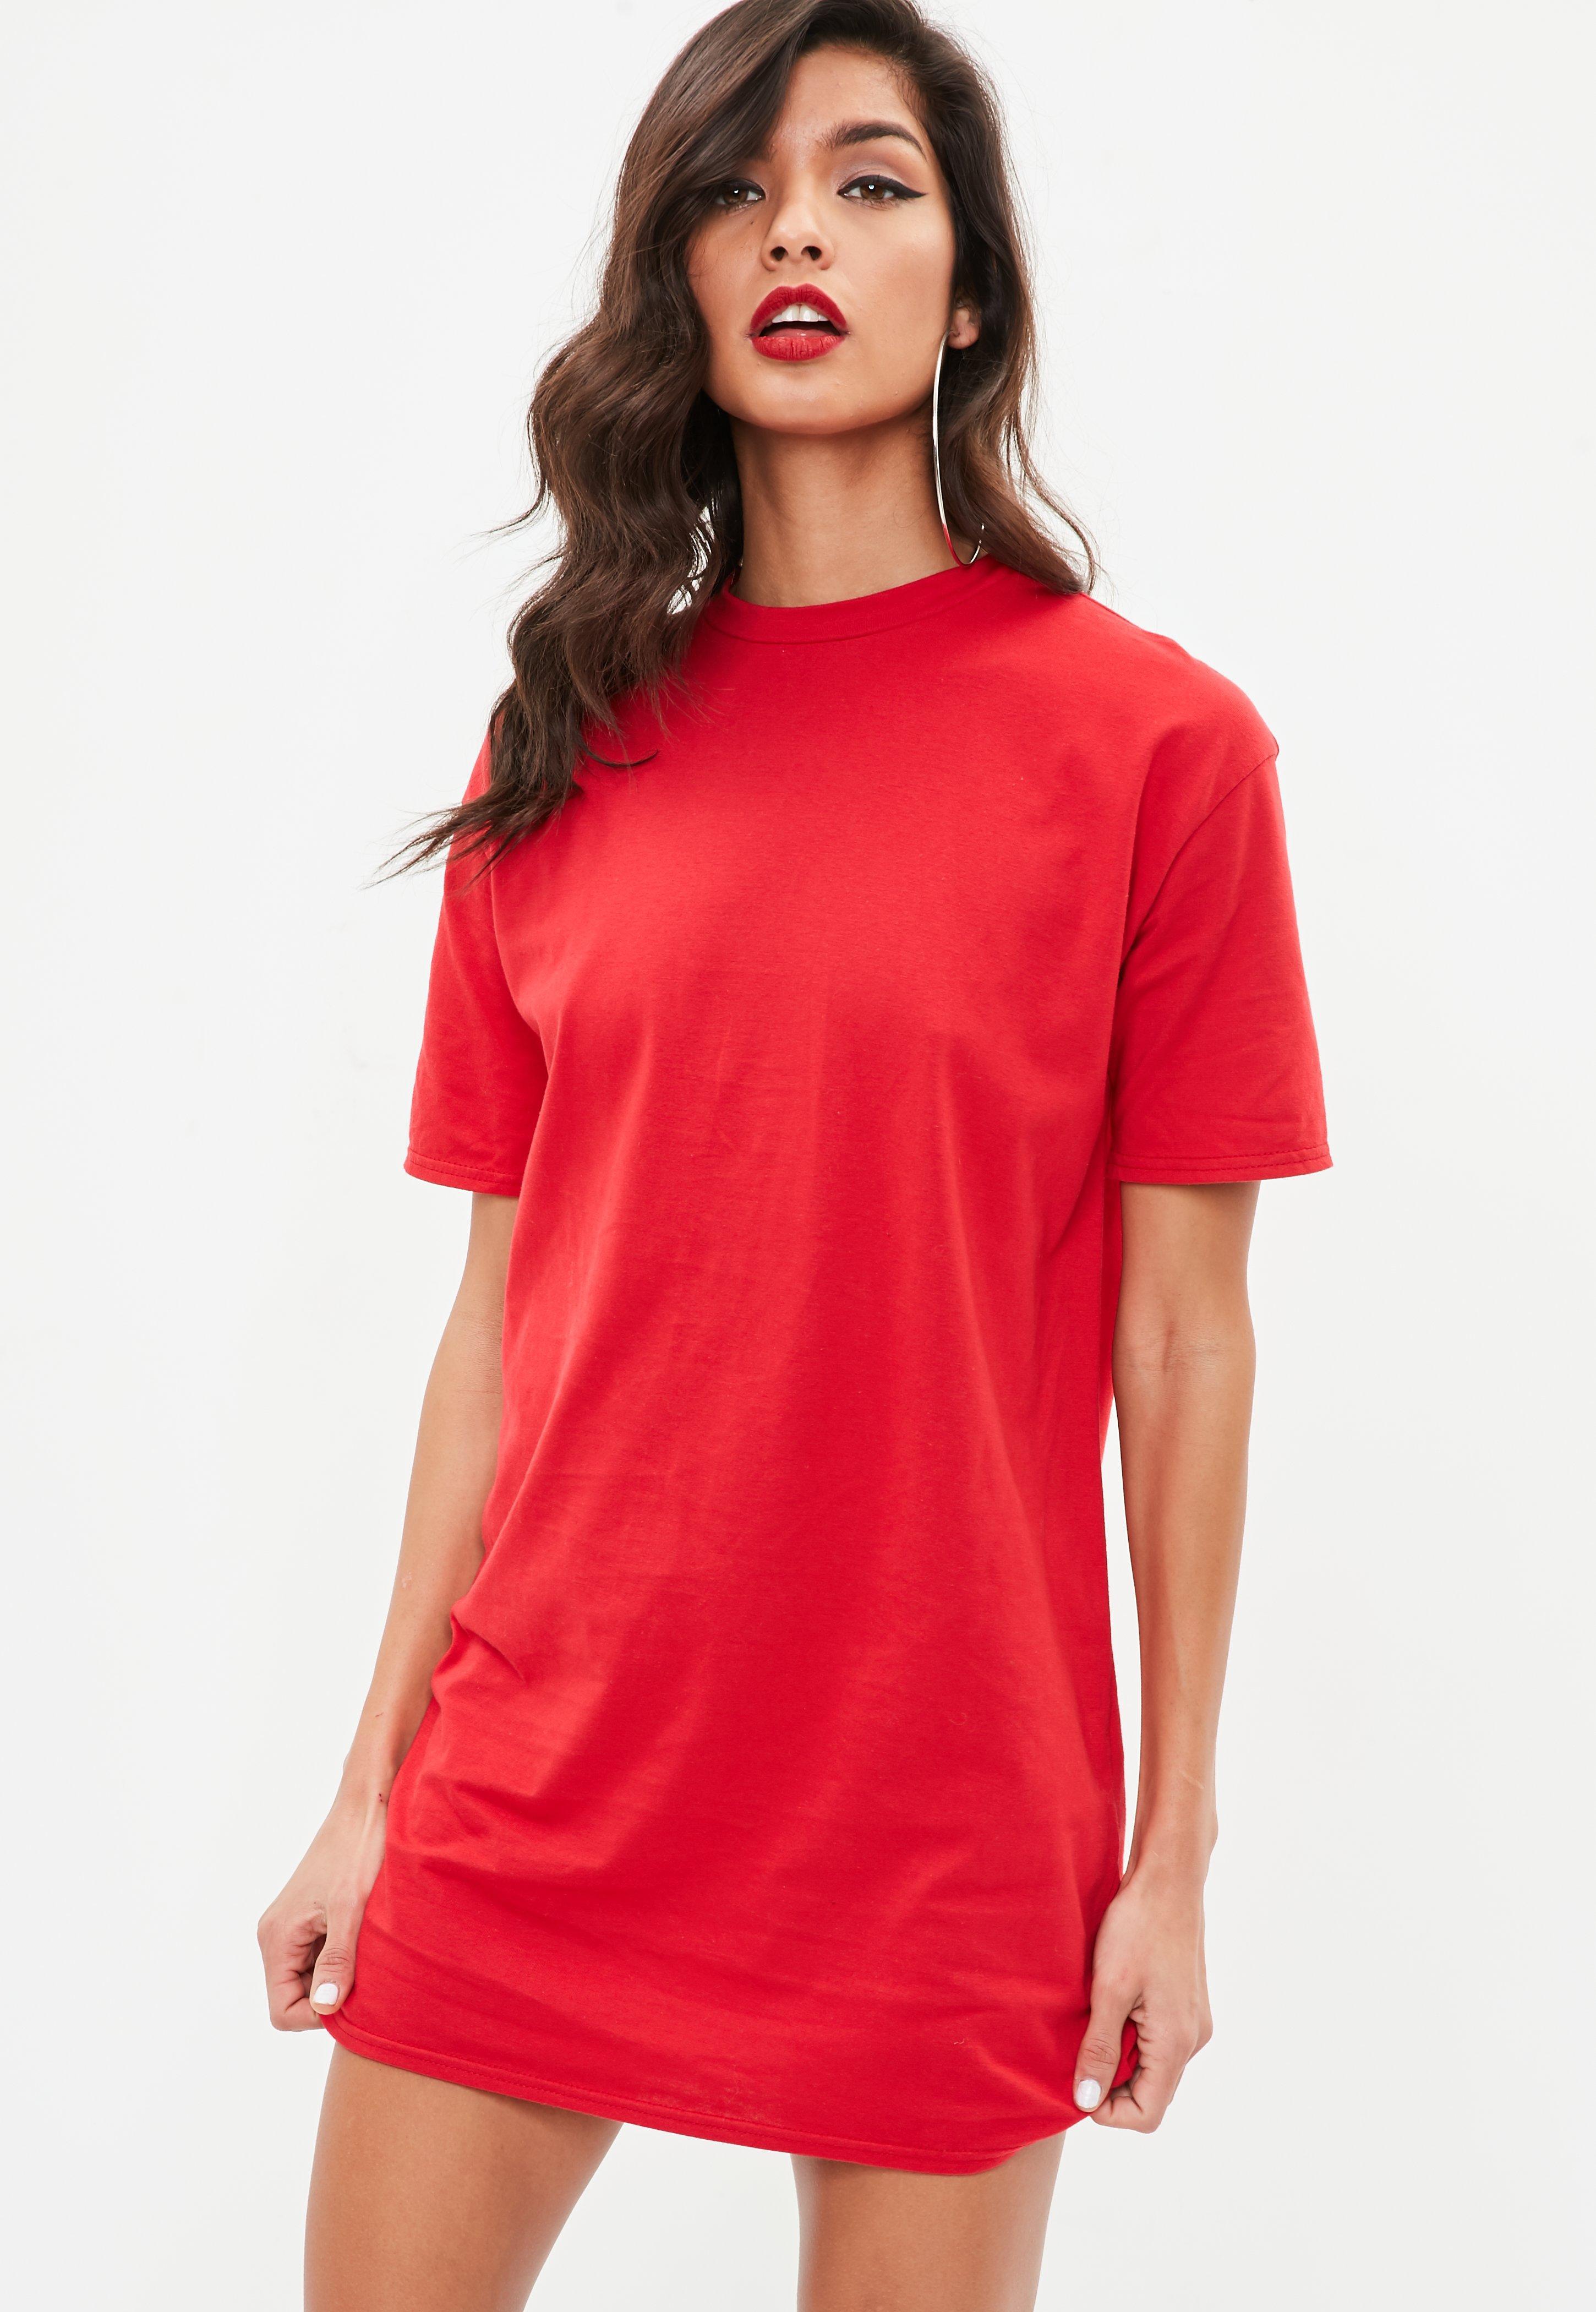 Lyst Missguided  Red Short Sleeve Crew Neck T shirt  Dress  